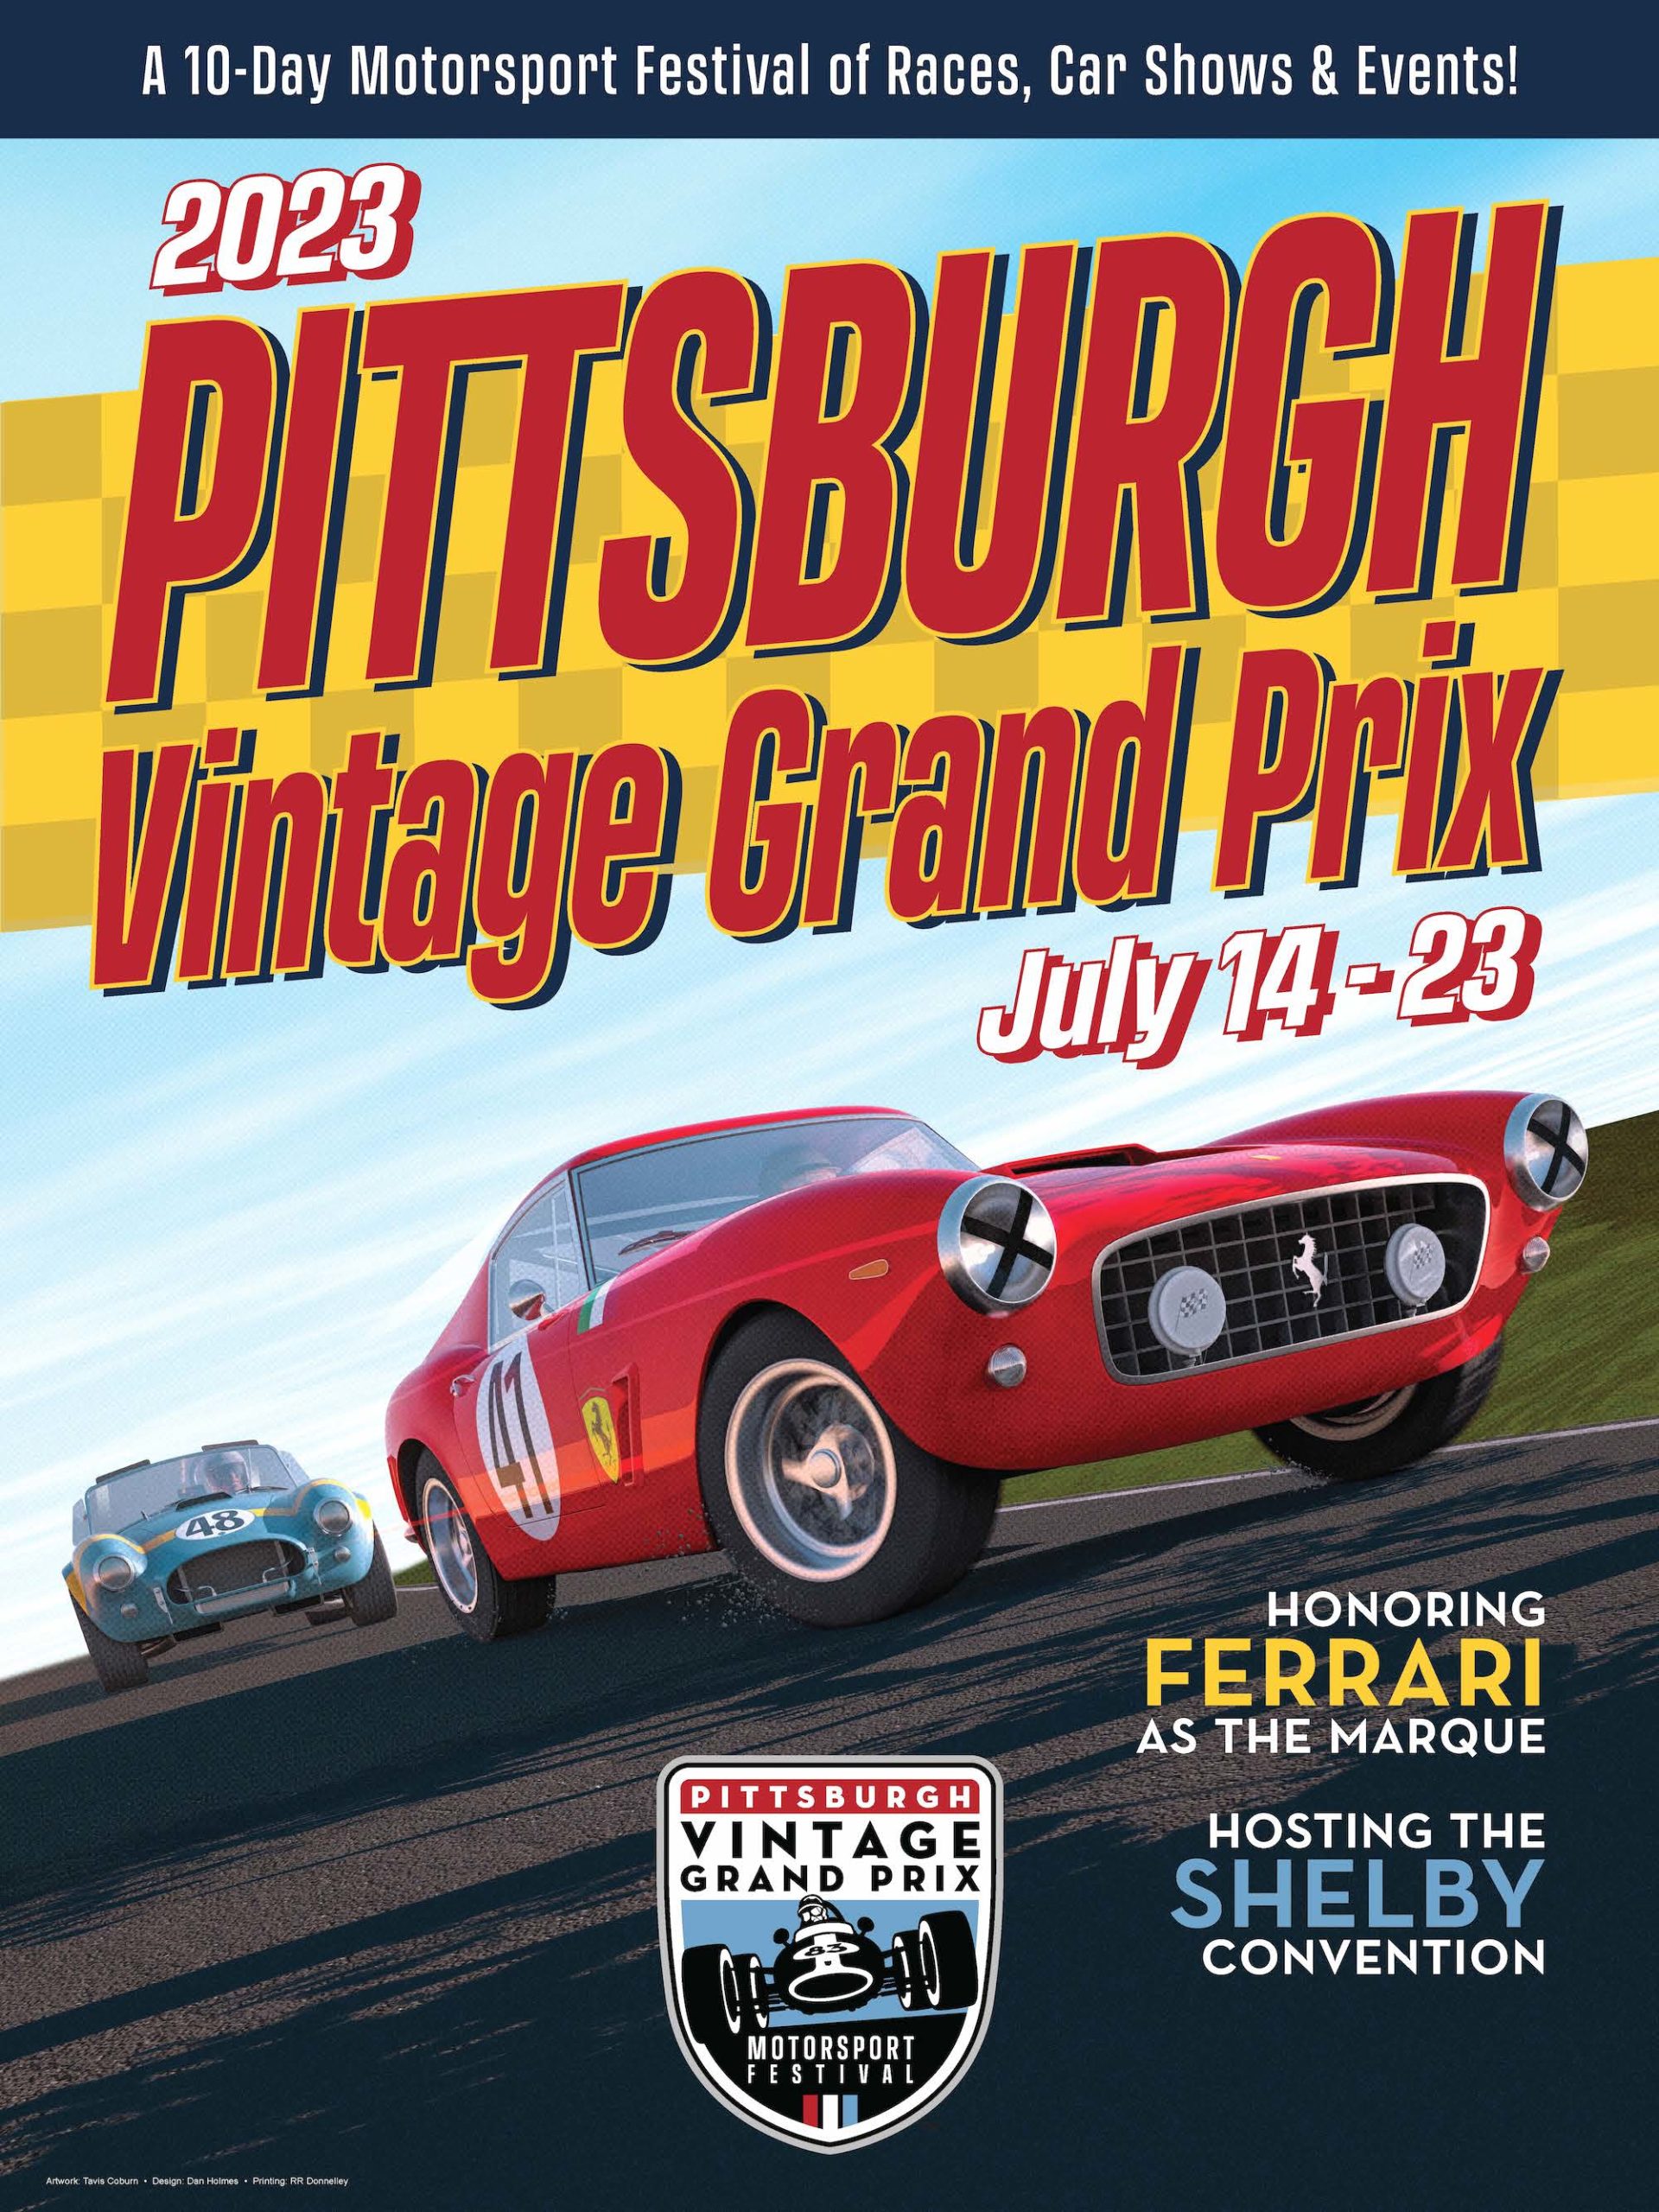 PVGP Reveals Poster Featuring Ferrari And Shelby At 2023 Pittsburgh